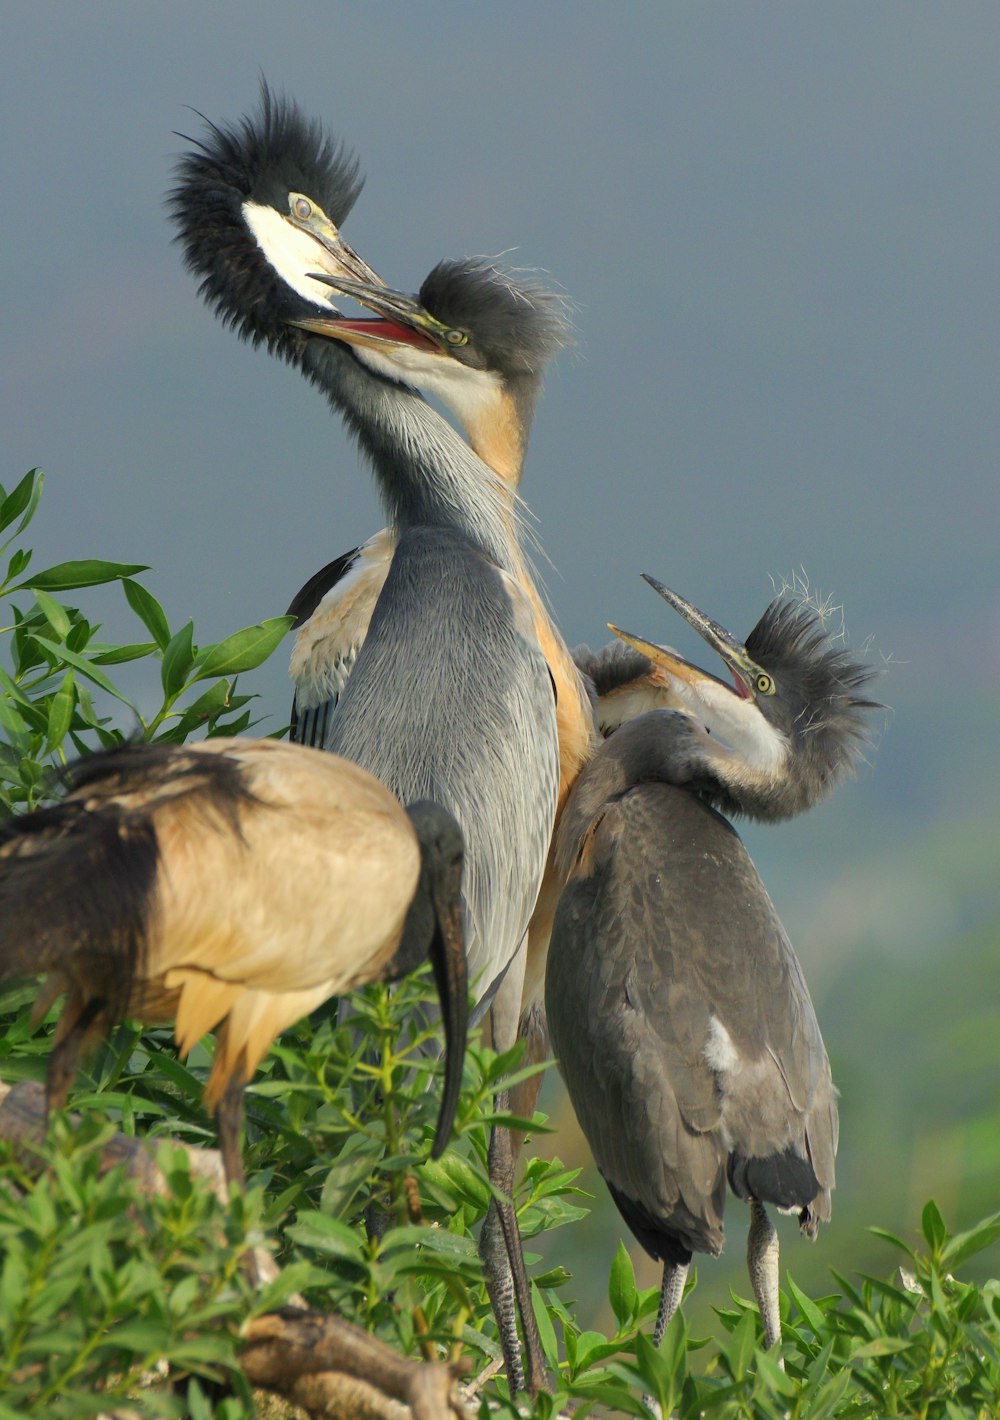 a group of birds standing on top of a lush green field